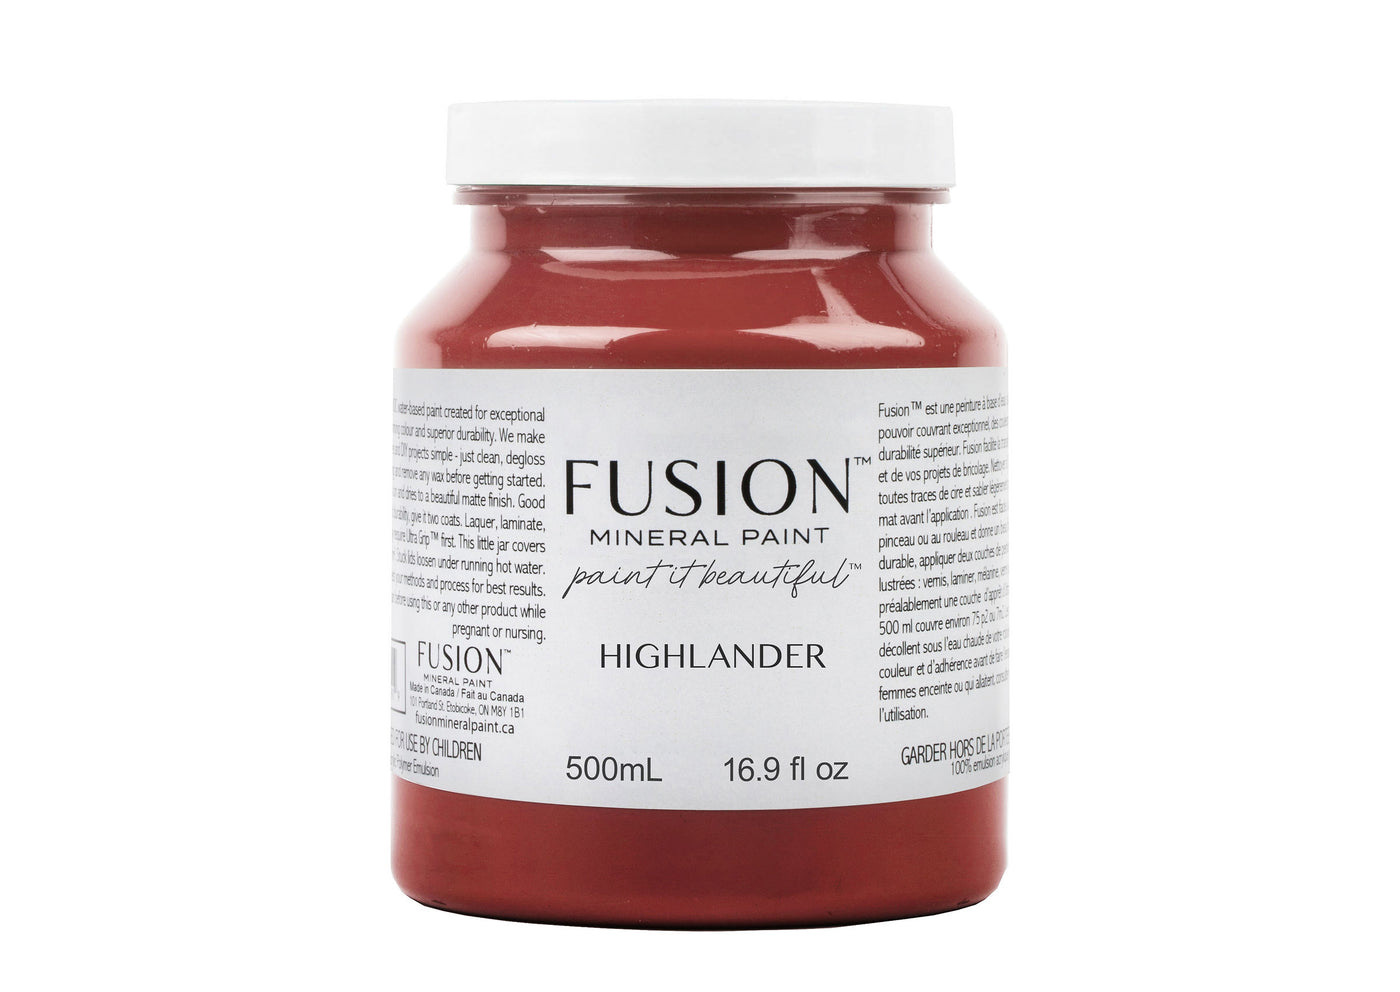 Deep red 500ml paint pint by Fusion Mineral Paint